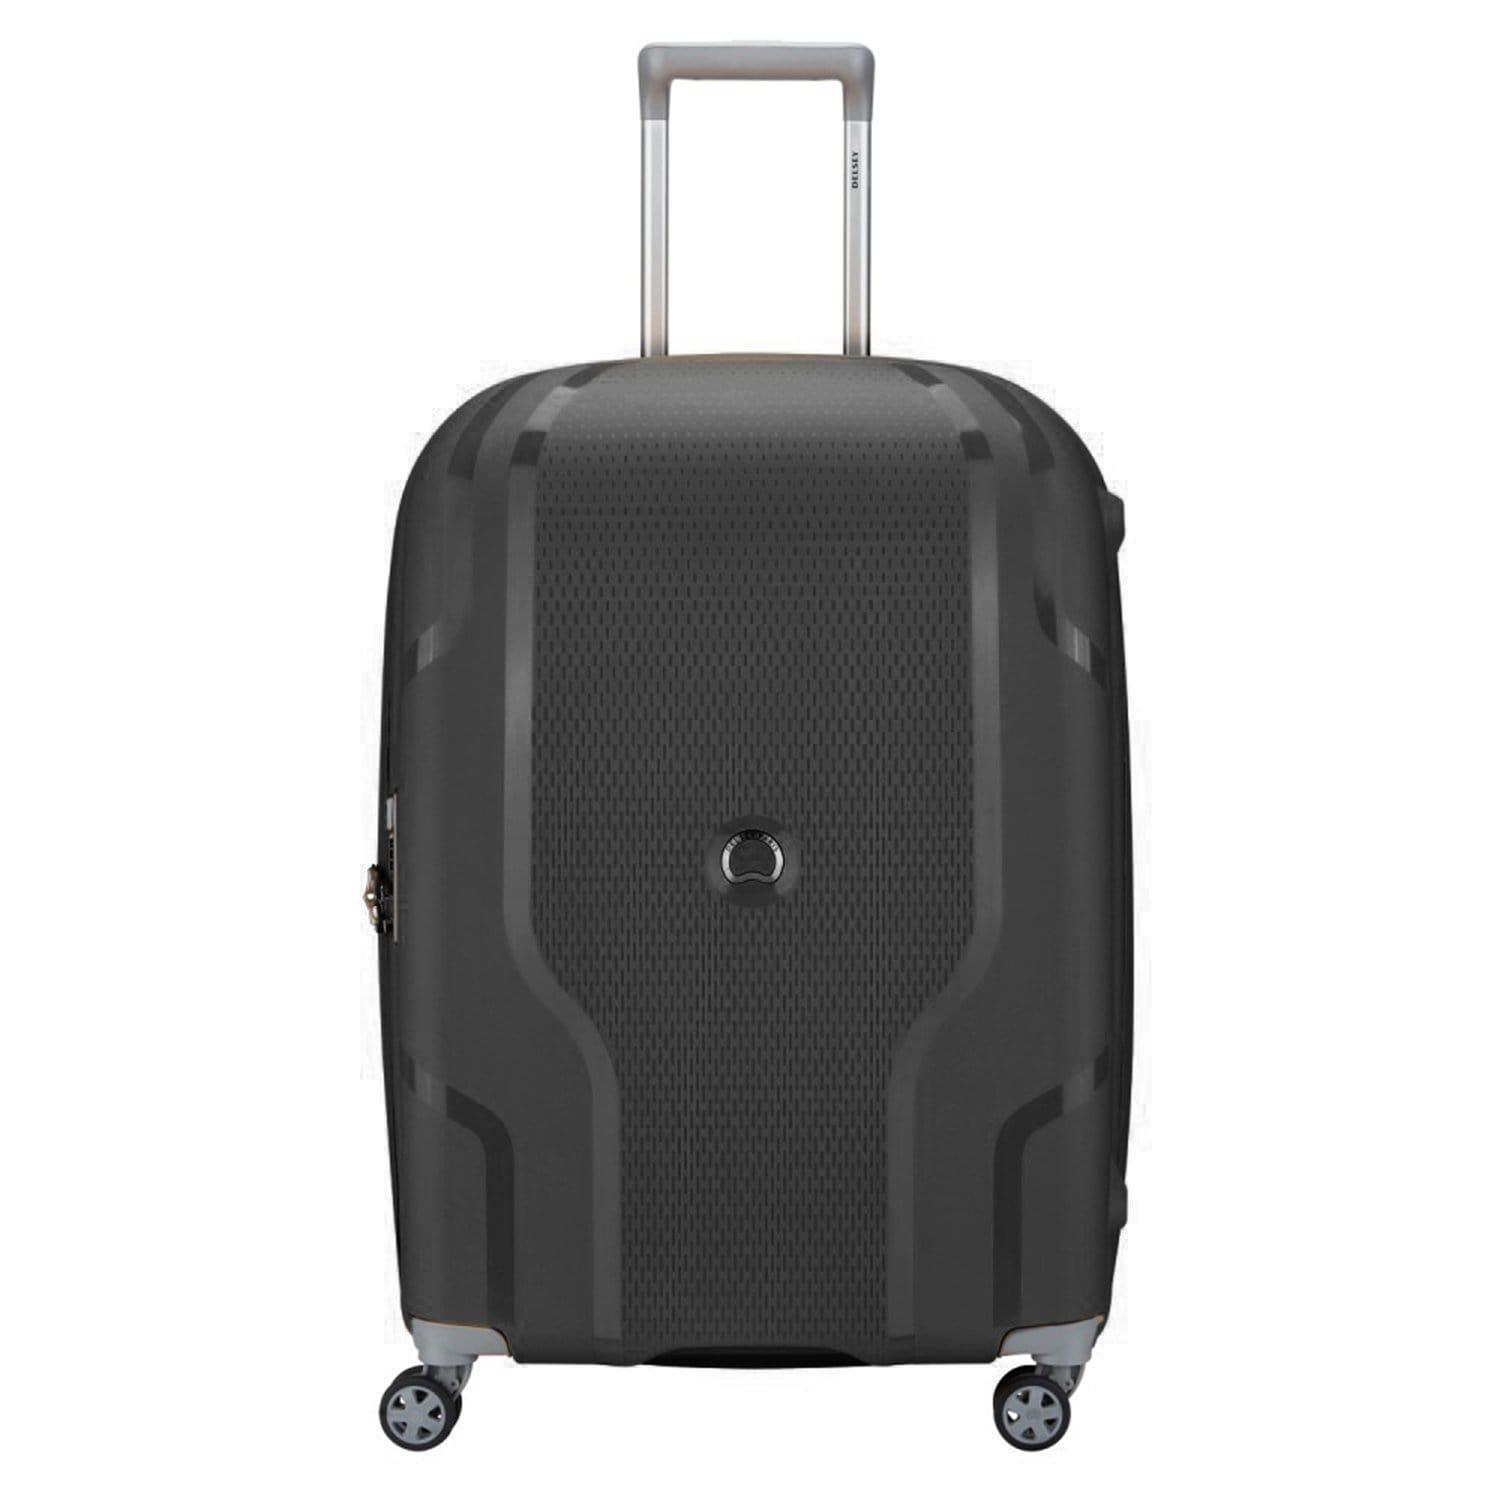 Delsey Clavel 55cm Hardcase 4 Double Wheel Expandable Cabin Luggage Trolley Black - 00384580100